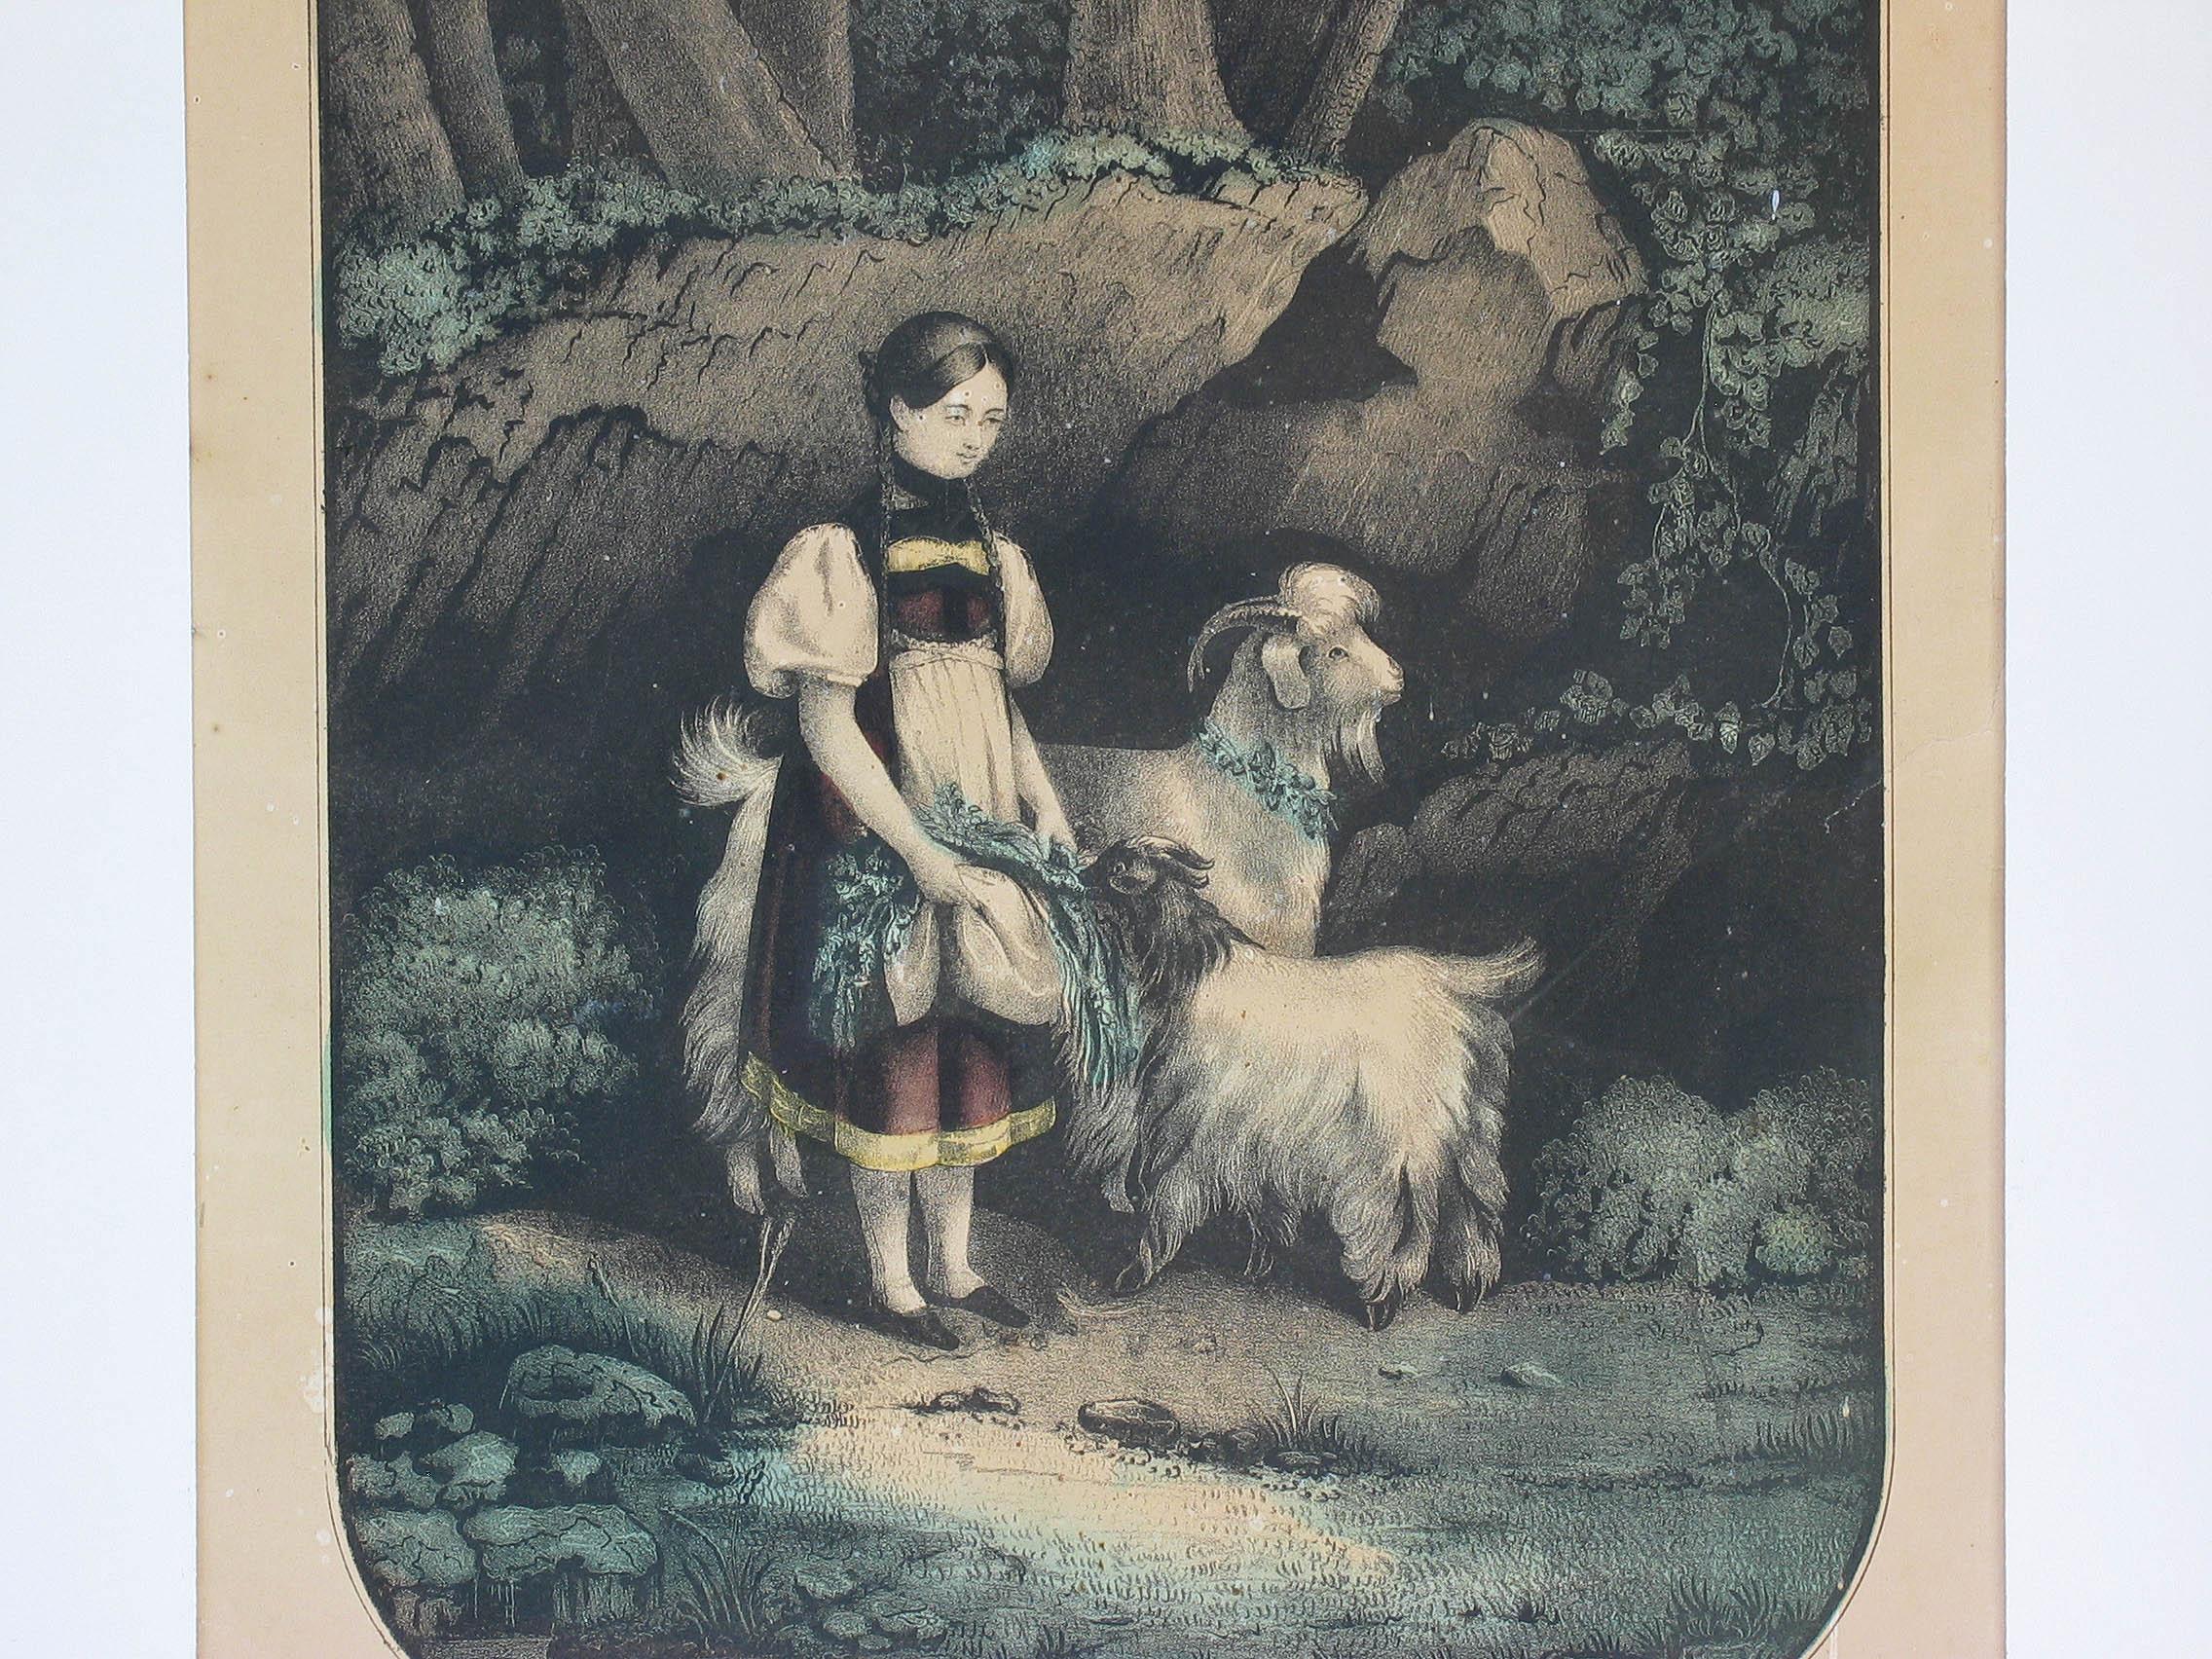 Hand-Painted Original Kellogg & Comstock Hand-Colored Lithograph 'Shepherdess of the Alps' For Sale